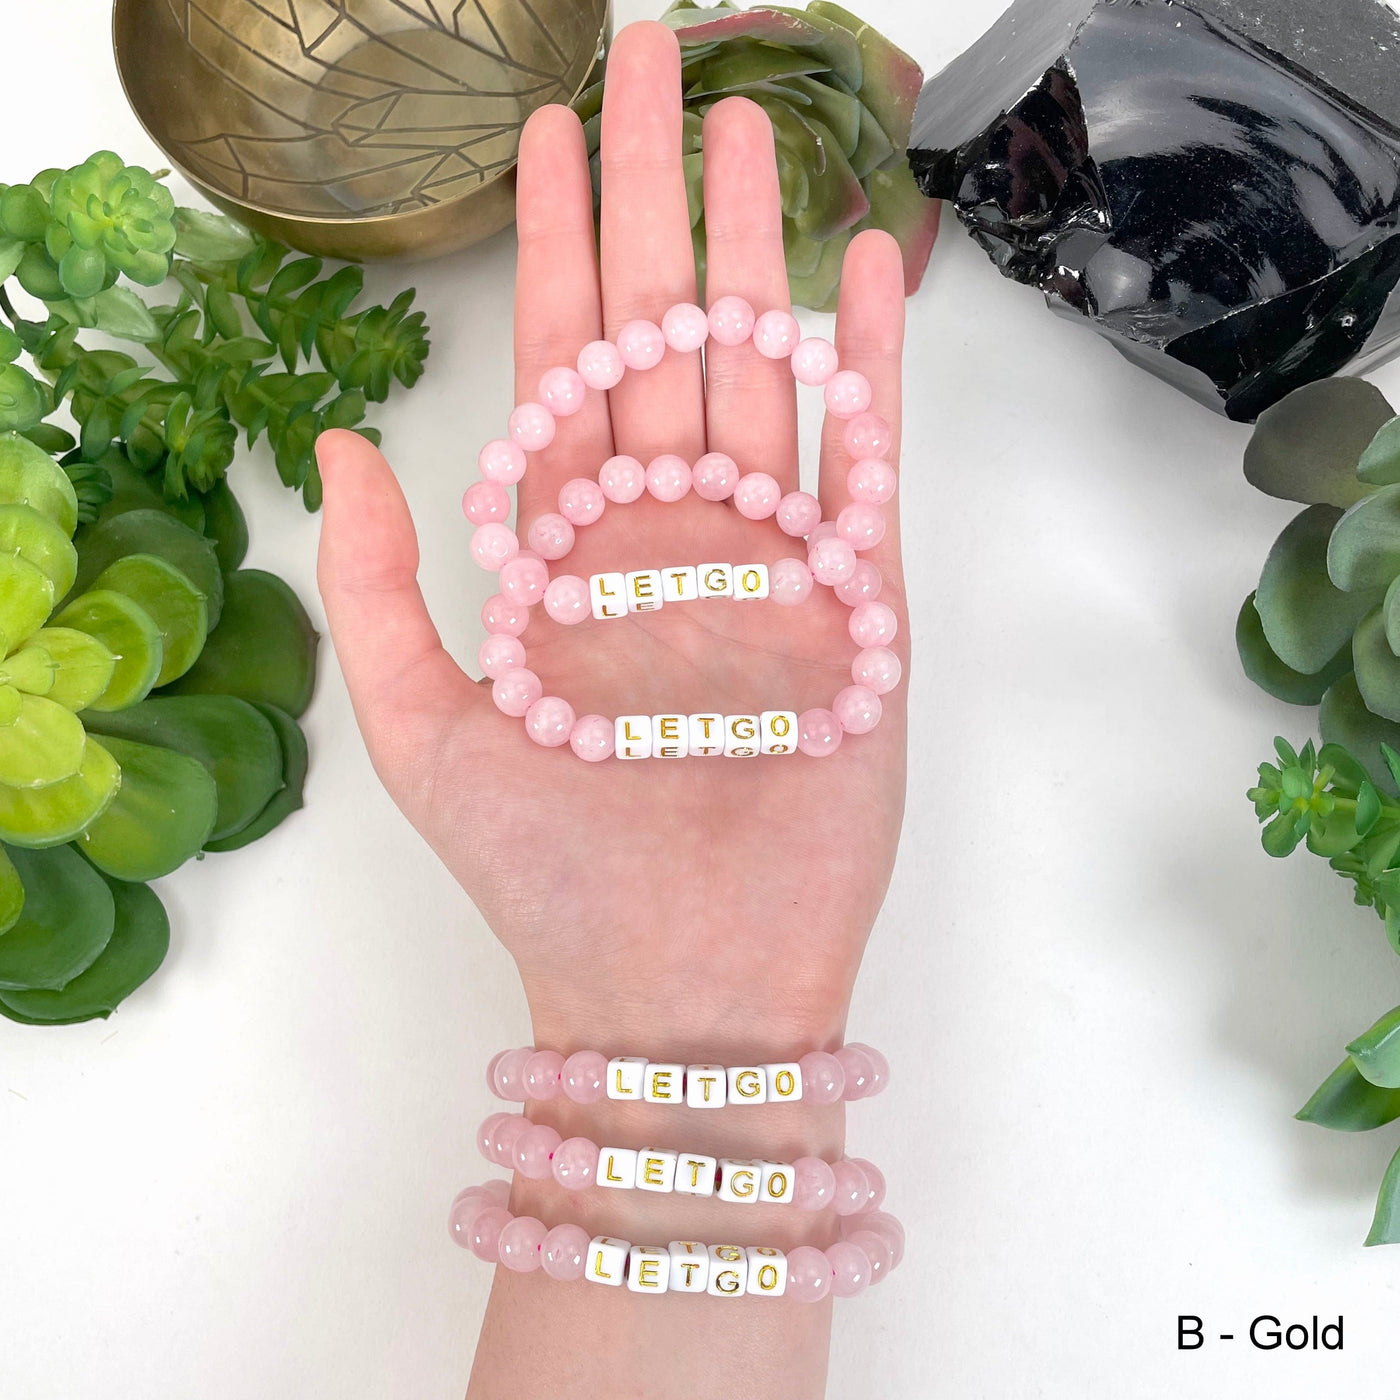 gold "LETGO" letter bead option in hand and on wrist for color reference